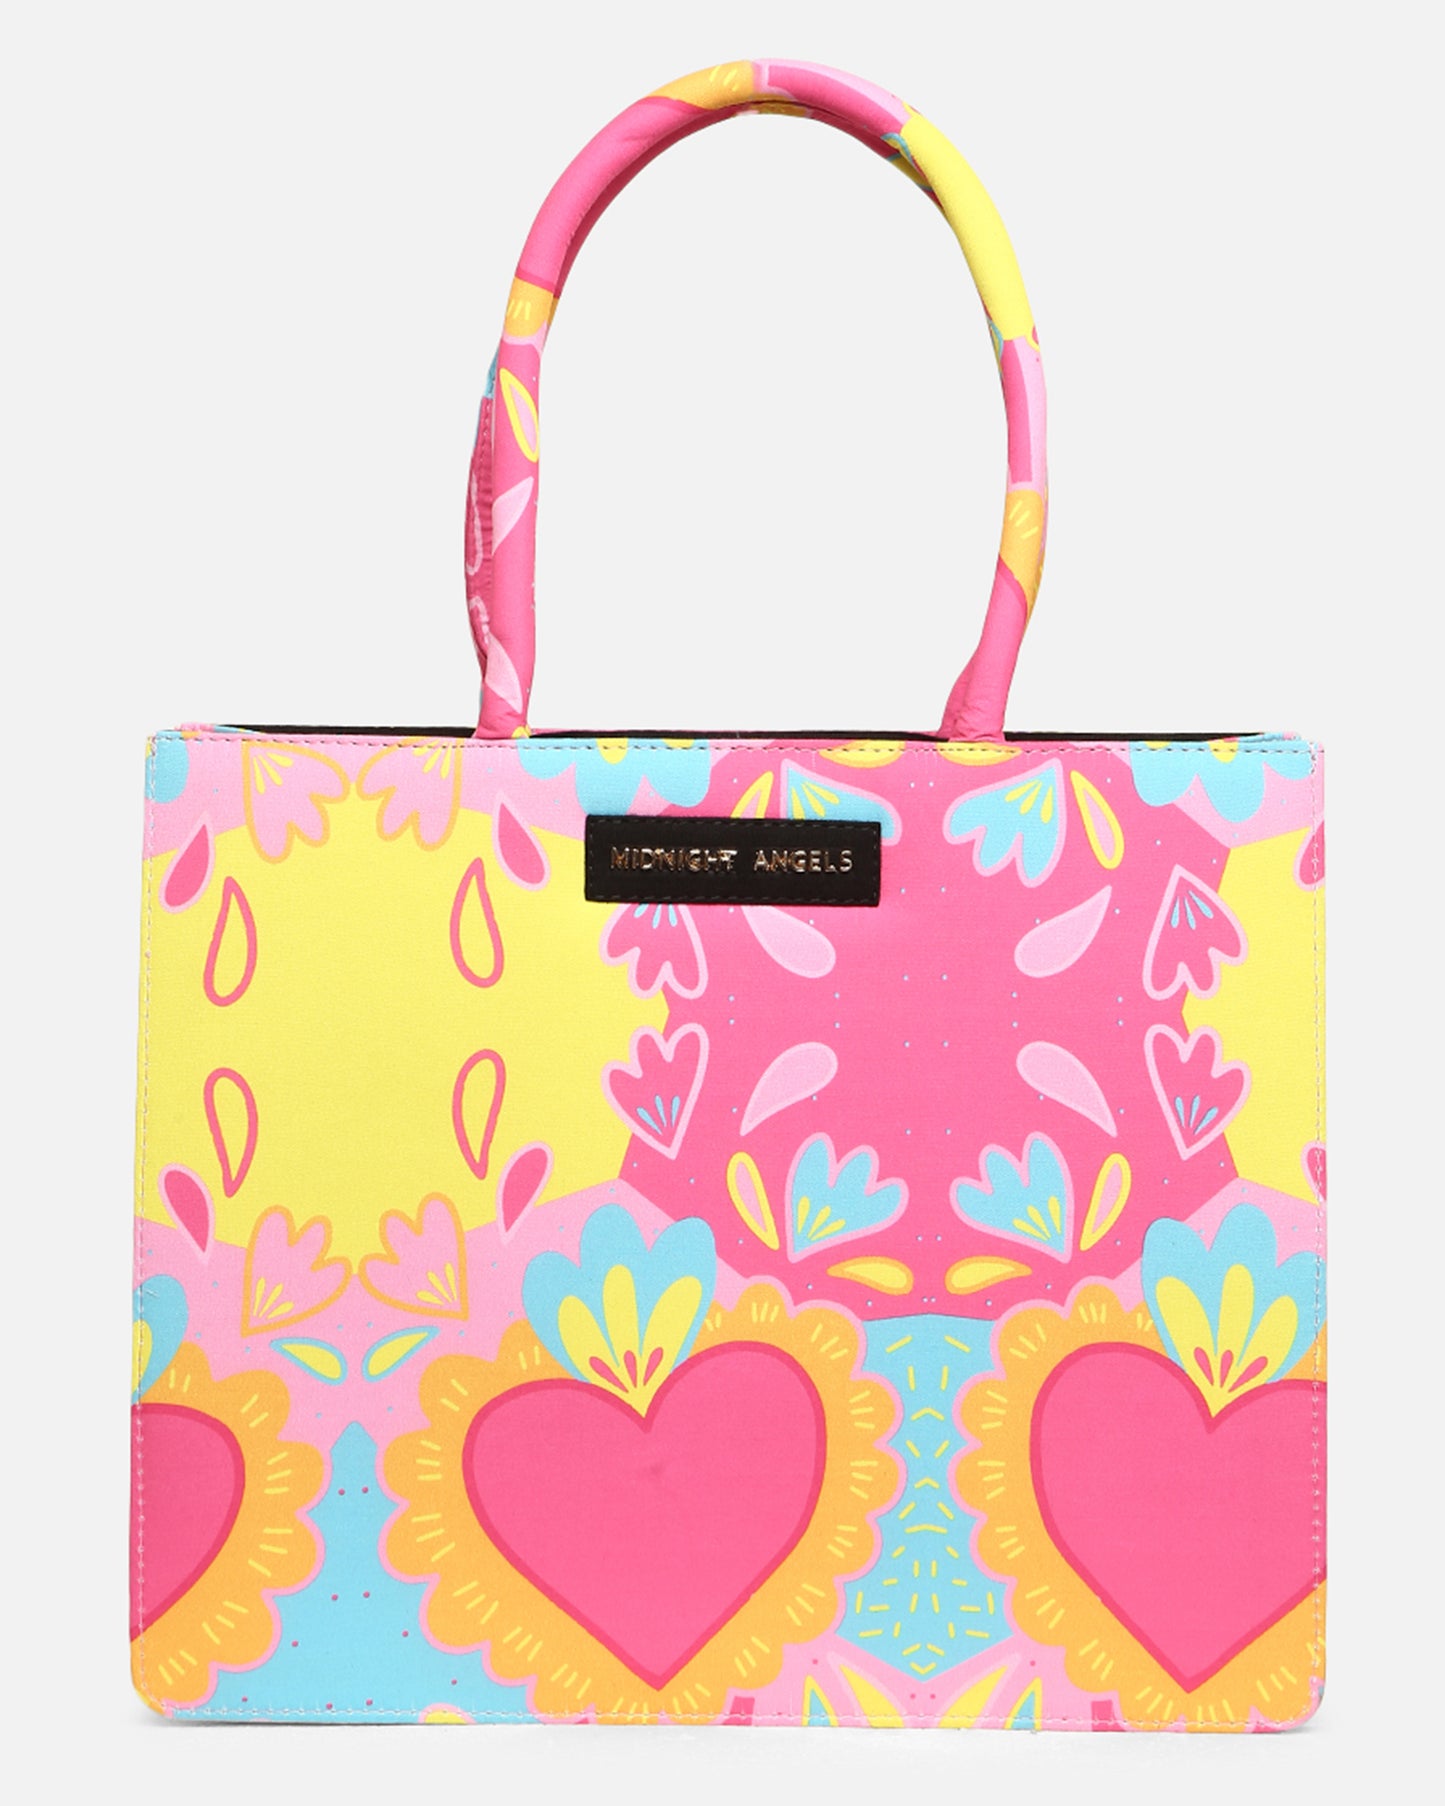 Hearty Land Tote Bag